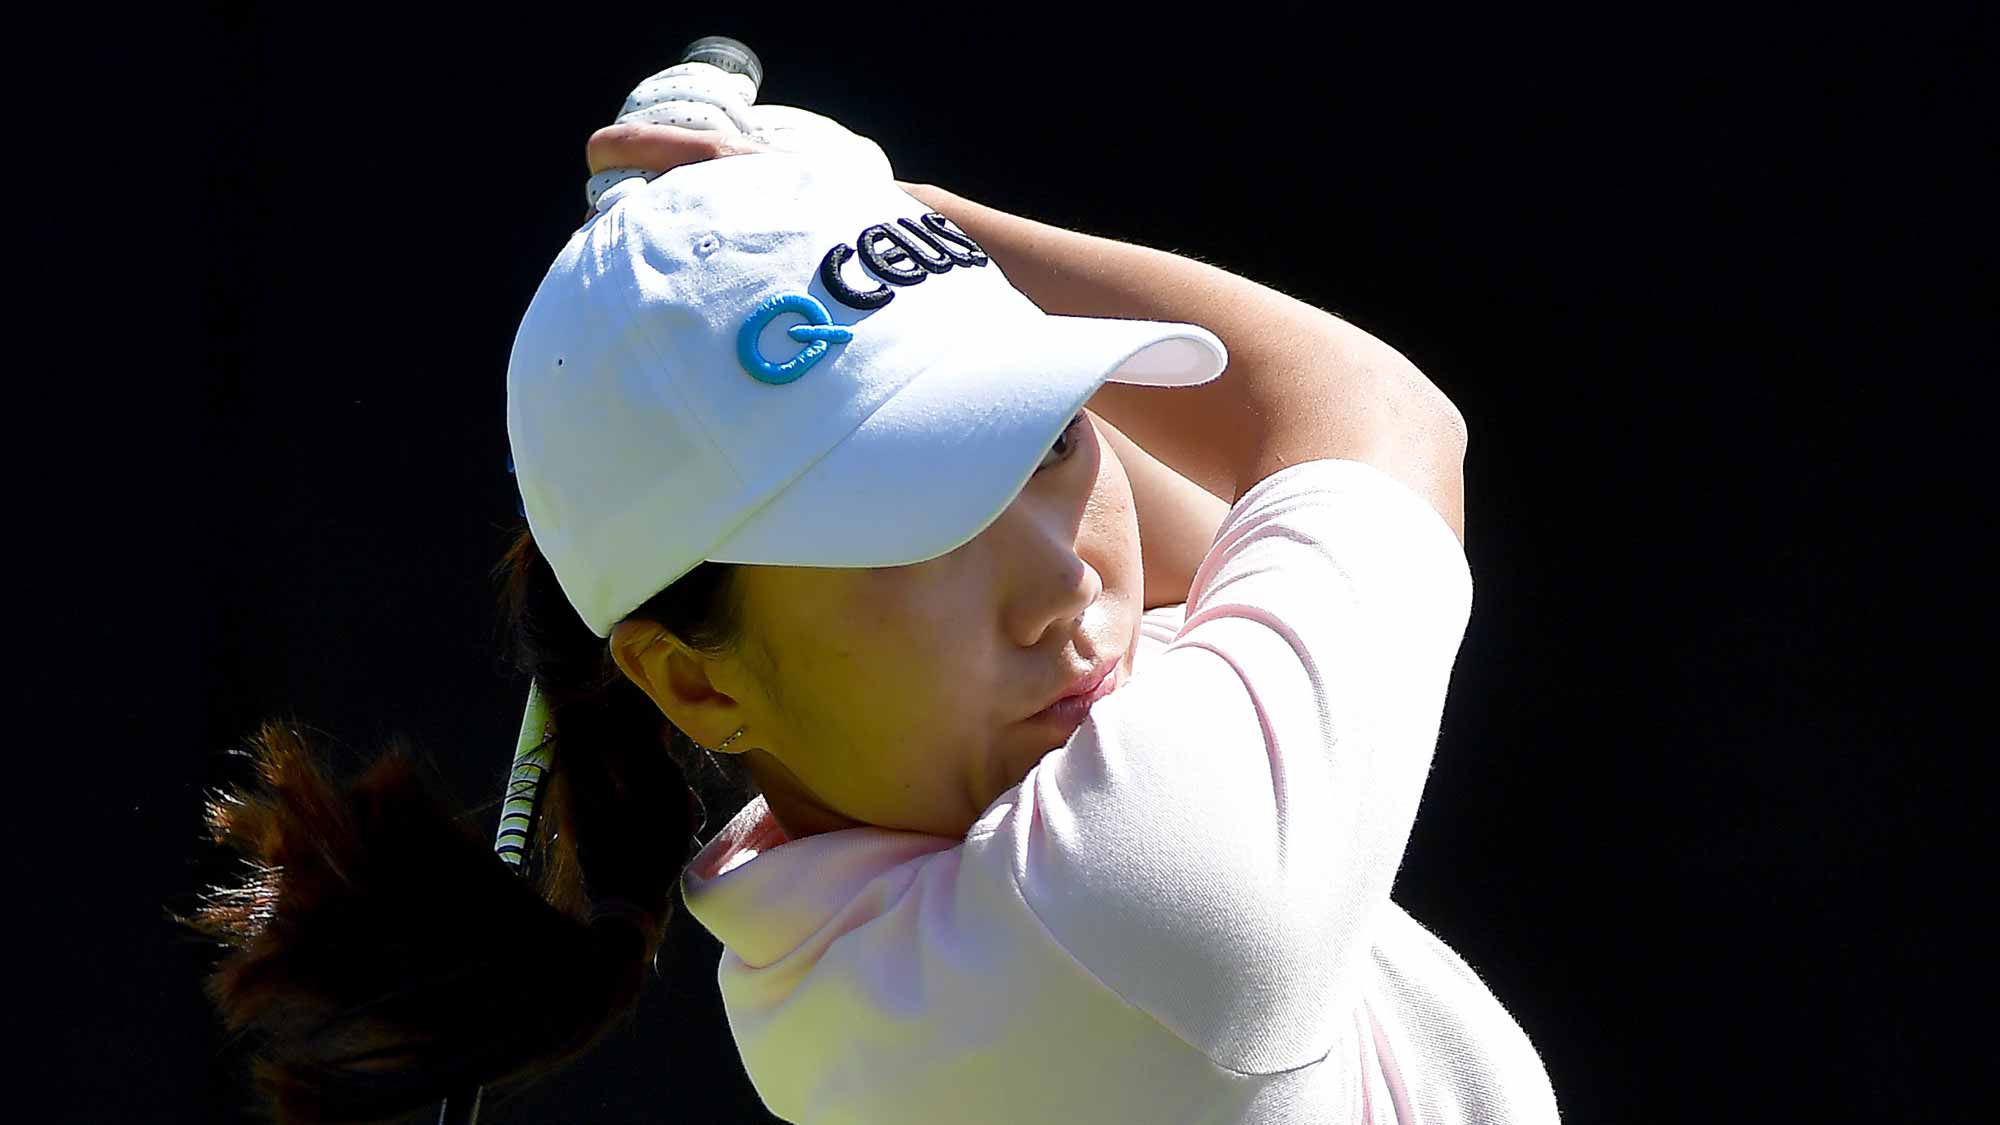 In-Kyung Kim of Korea tees off the 1st hole during the Final Round of the LPGA KIA CLASSIC at the Park Hyatt Aviara golf course on March 25, 2018 in Carlsbad, California